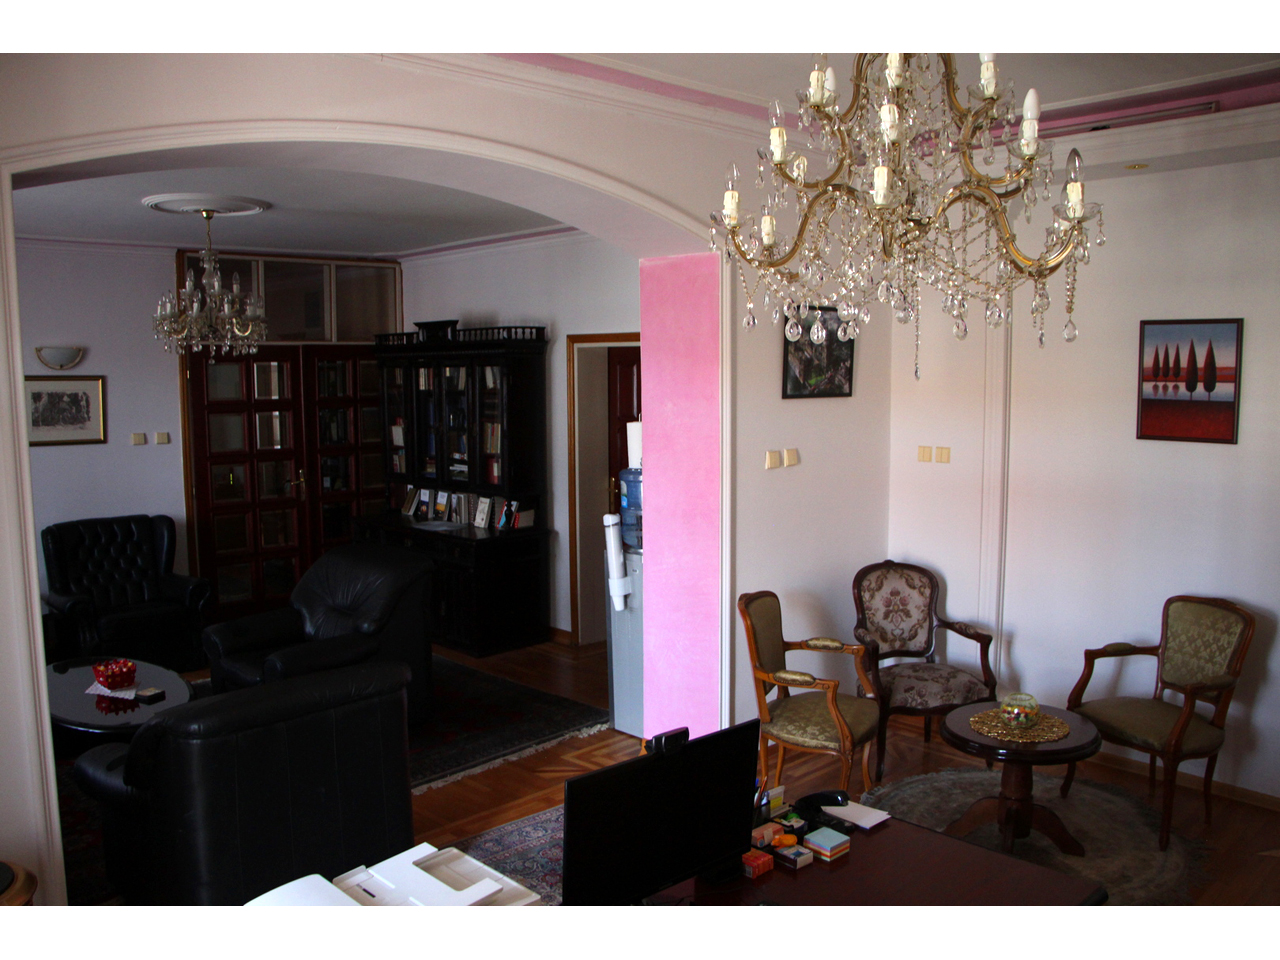 EPISTEMA PSYCHIATRY AND PSYCHOTHERAPY MEDICAL OFFICE Psychotherapists, psychotherapy Belgrade - Photo 11